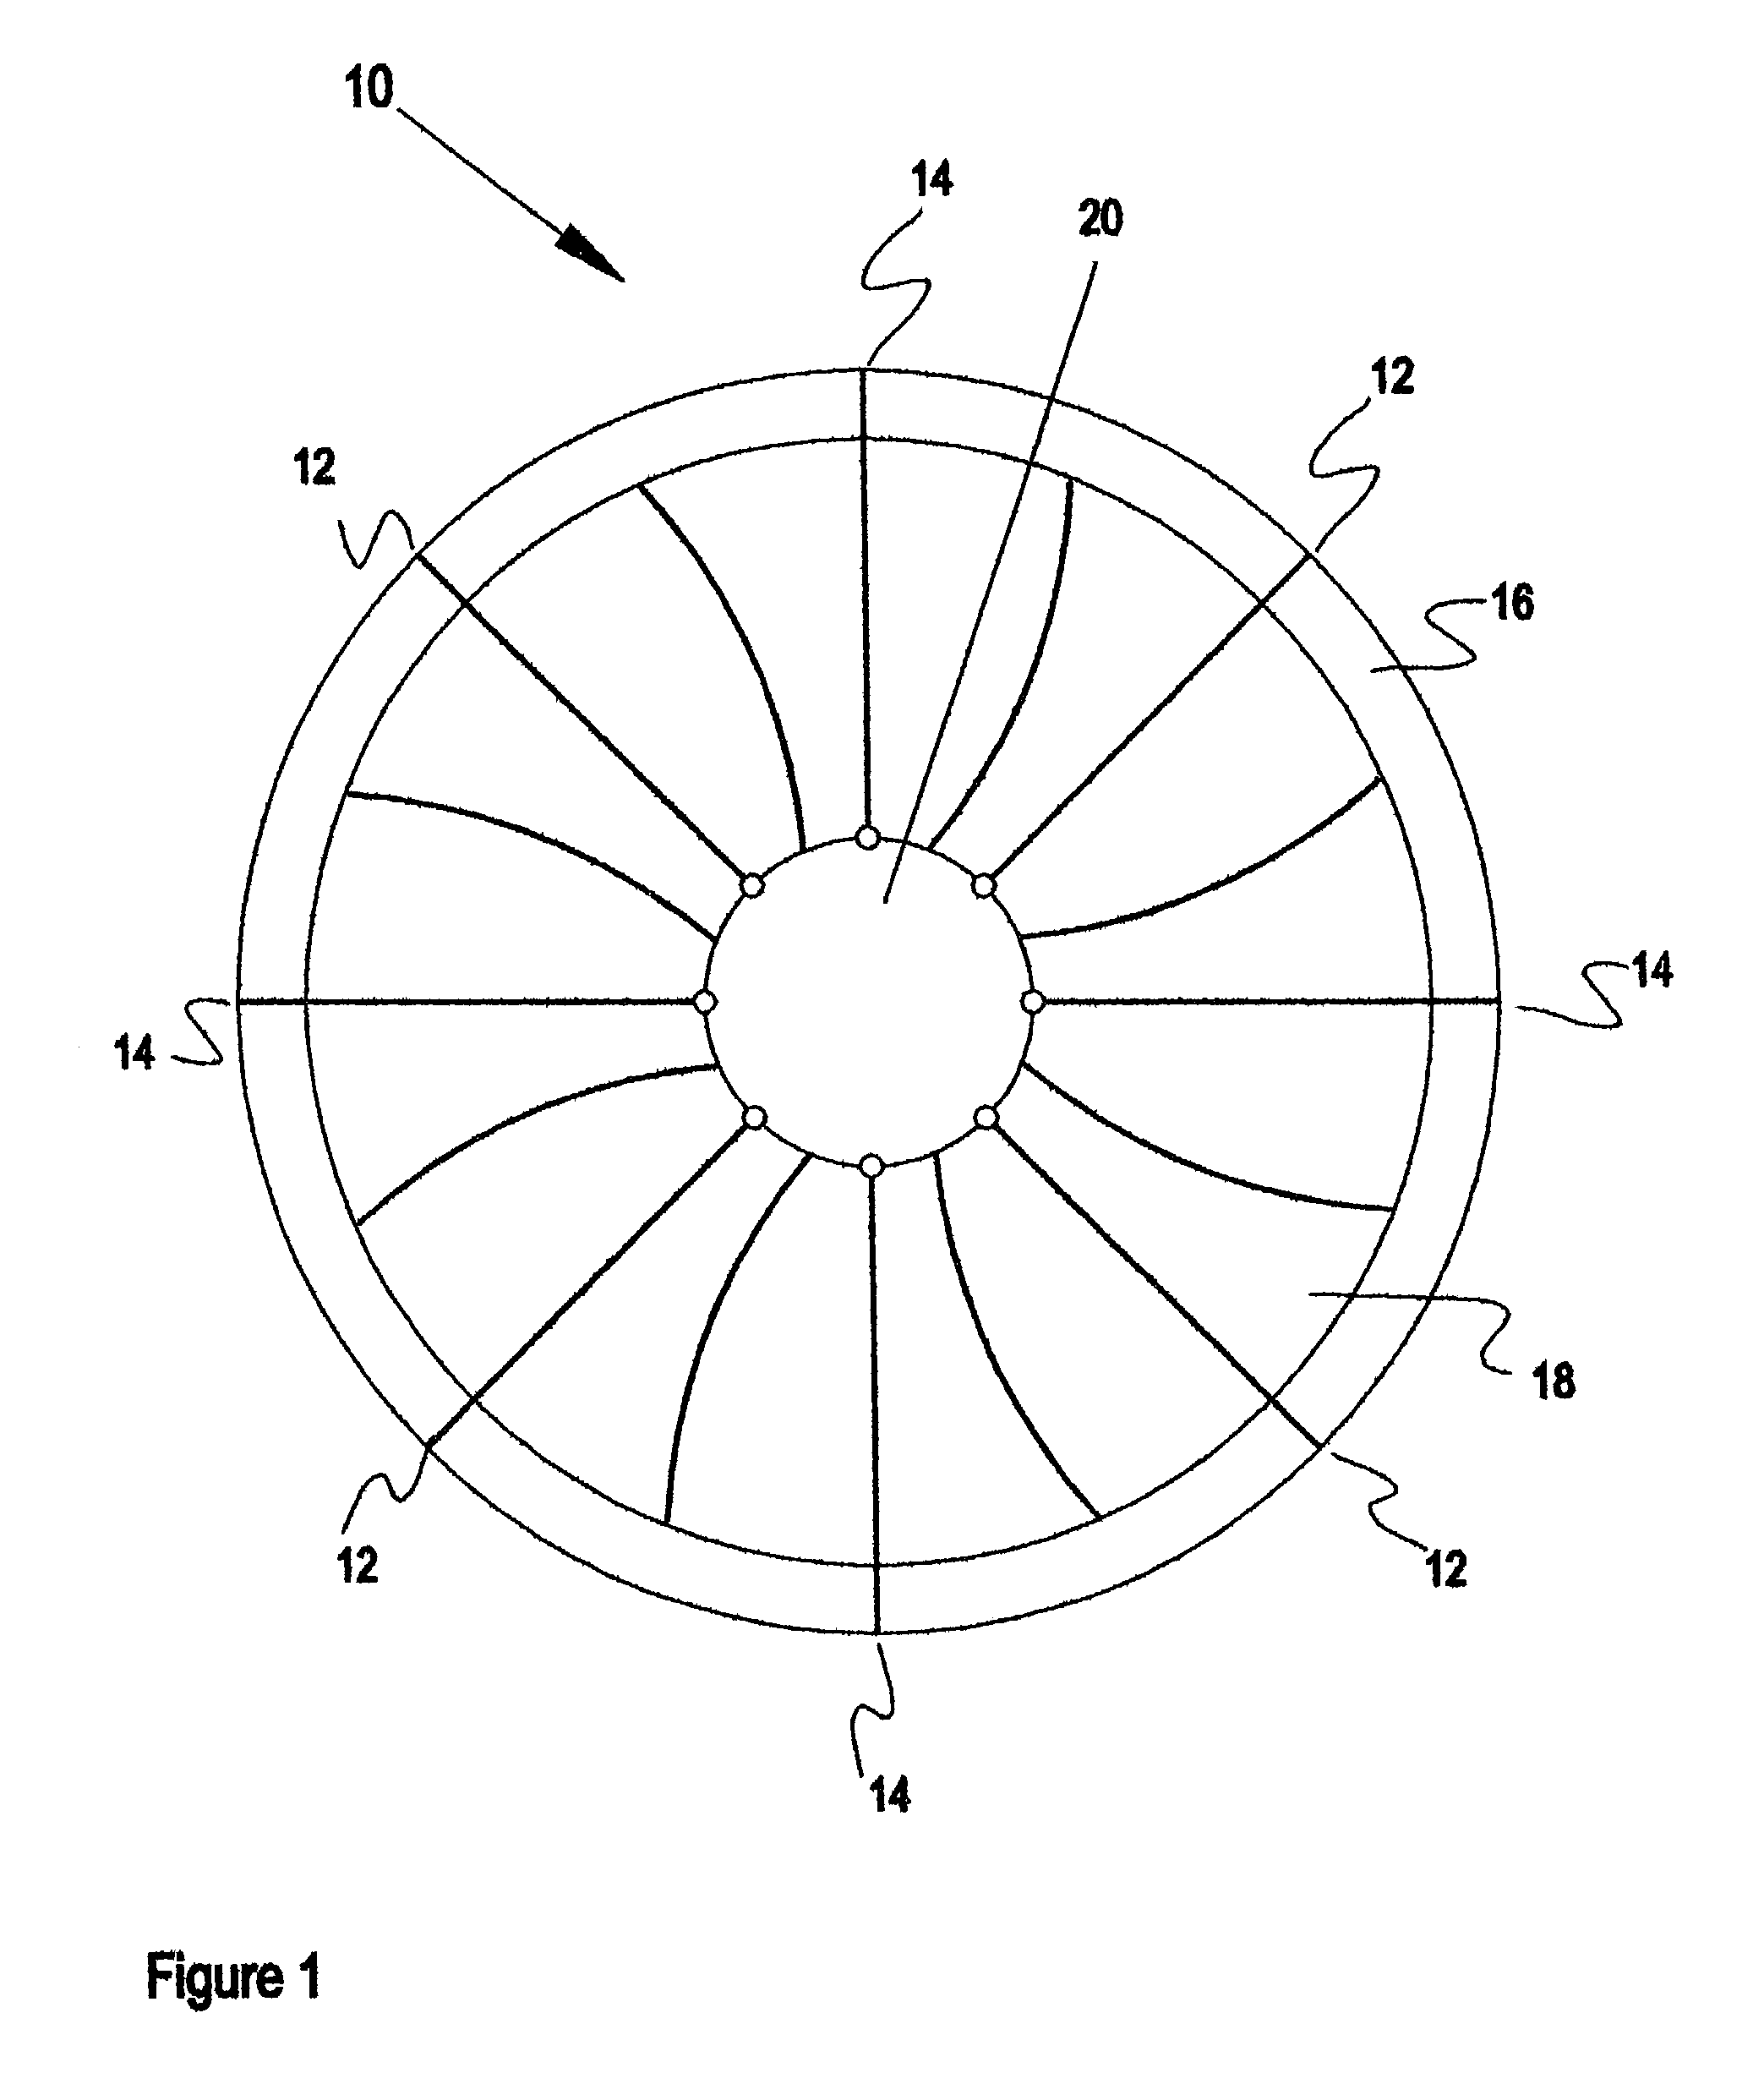 Reconstructed refractive index spatial maps and method with algorithm